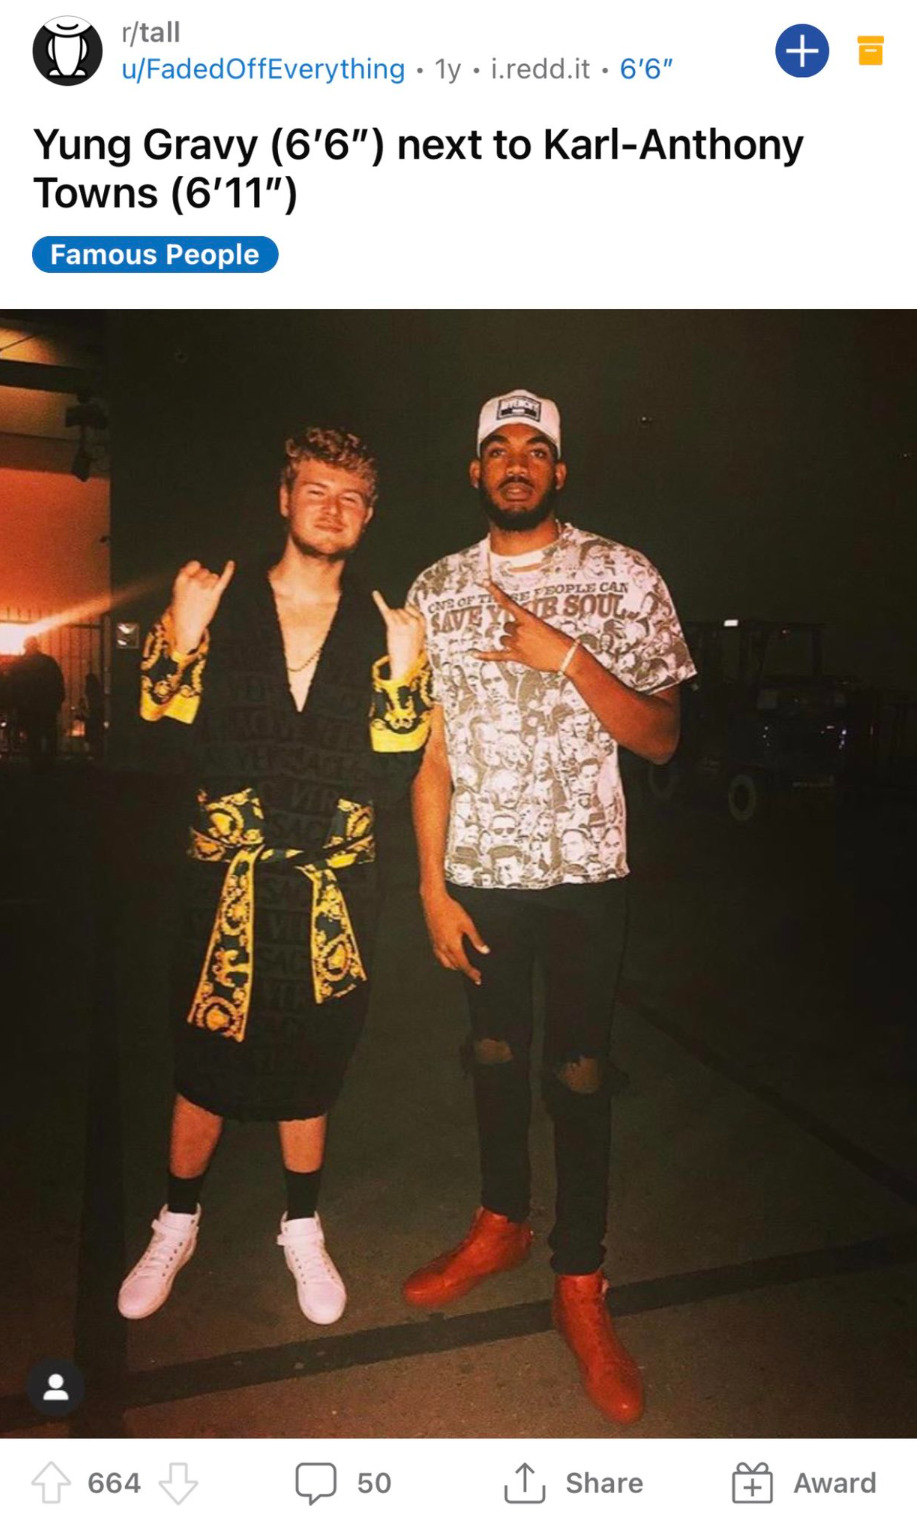 Yung Gravy and Karl-Anthony Towns via Twitter.